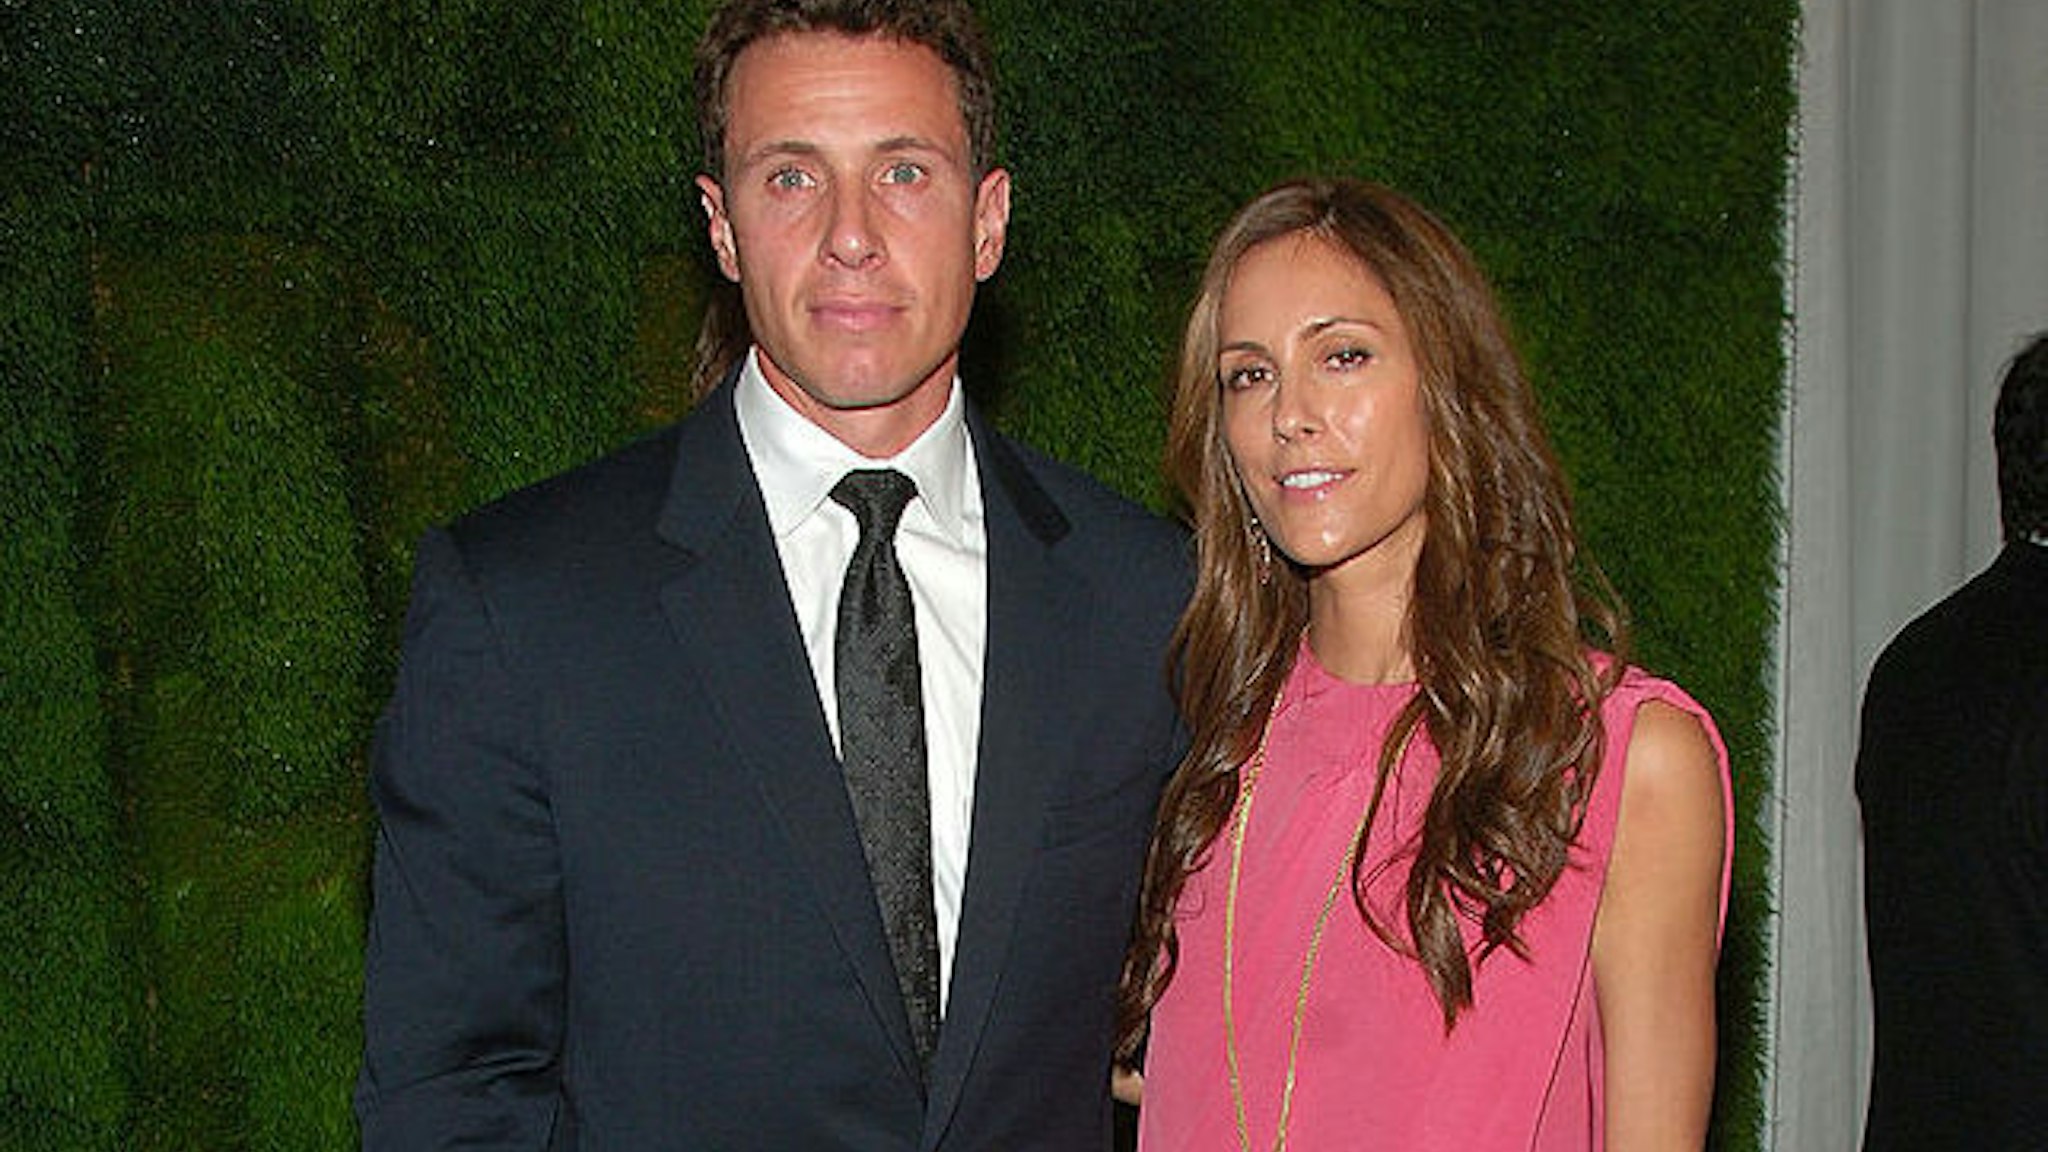 Anchorman Chris Cuomo and wife Cristina Cuomo attend MoMA's 40th Annual Party in the Garden on June 10, 2008 at The Abby Aldrich Rockefeller Sculpture Garden of The Museum of Modern Art in New York.